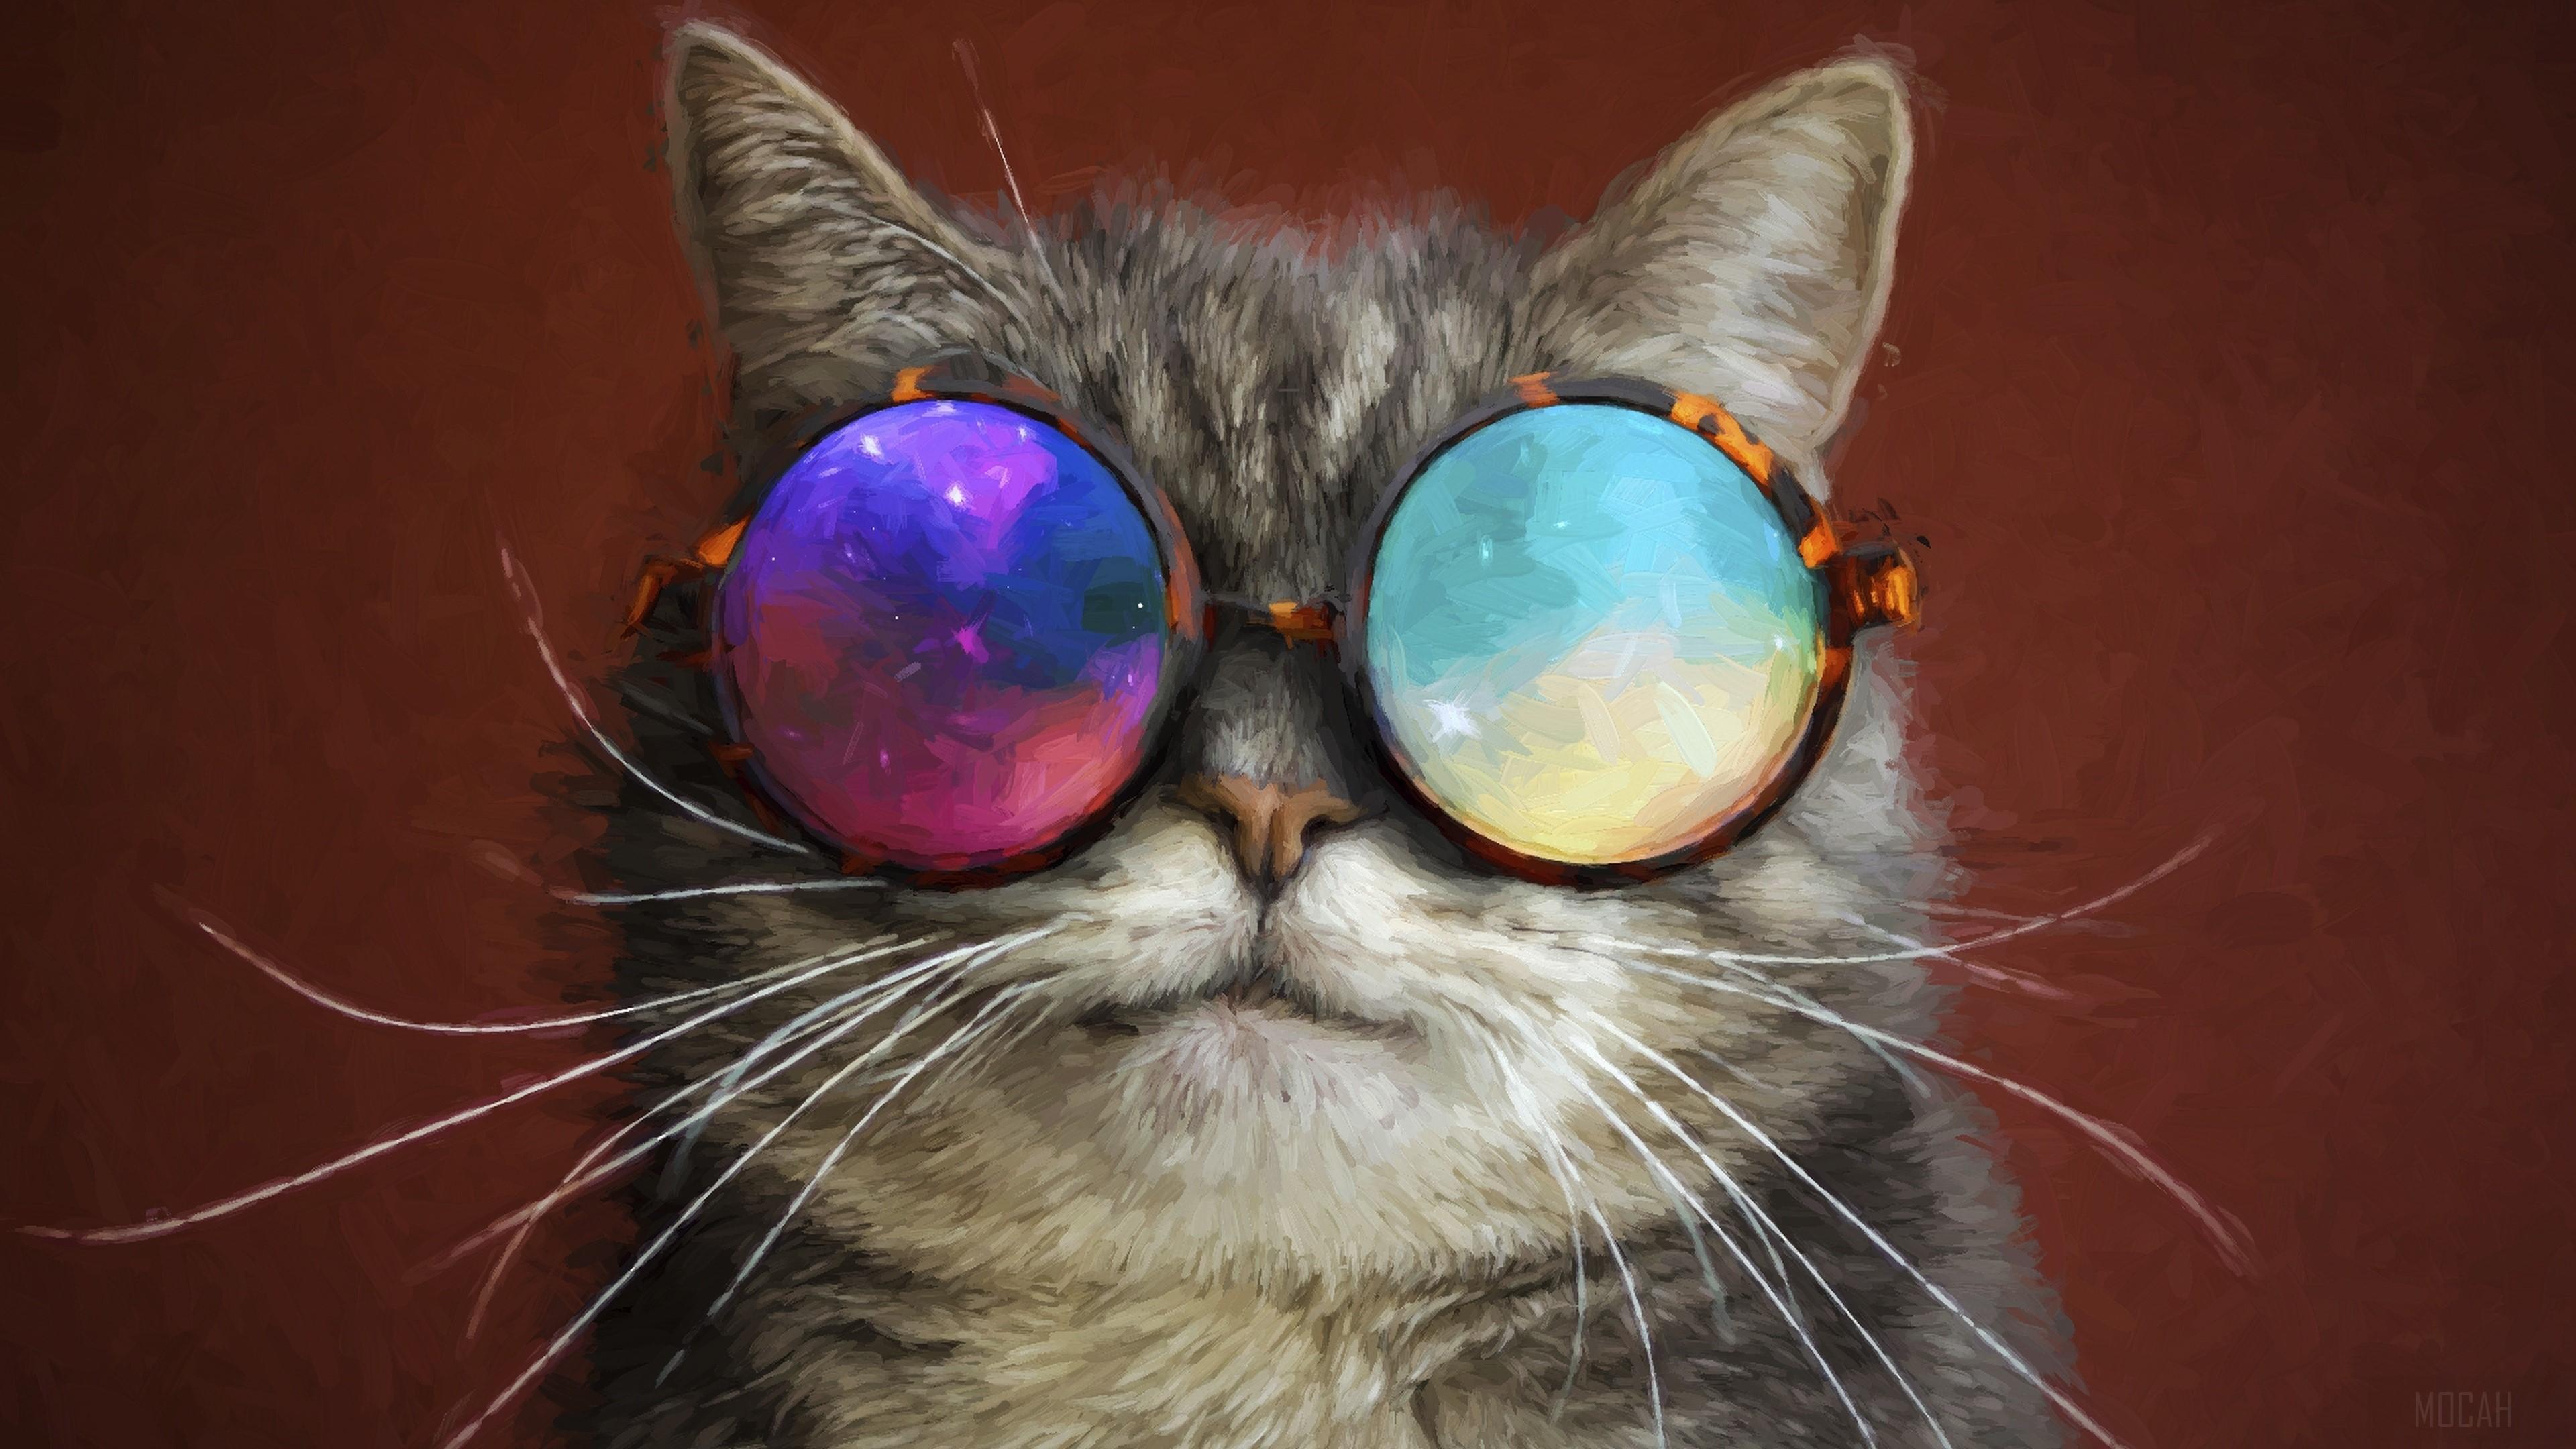 HD wallpaper, Cat Glasses Party Cool Painting 4K